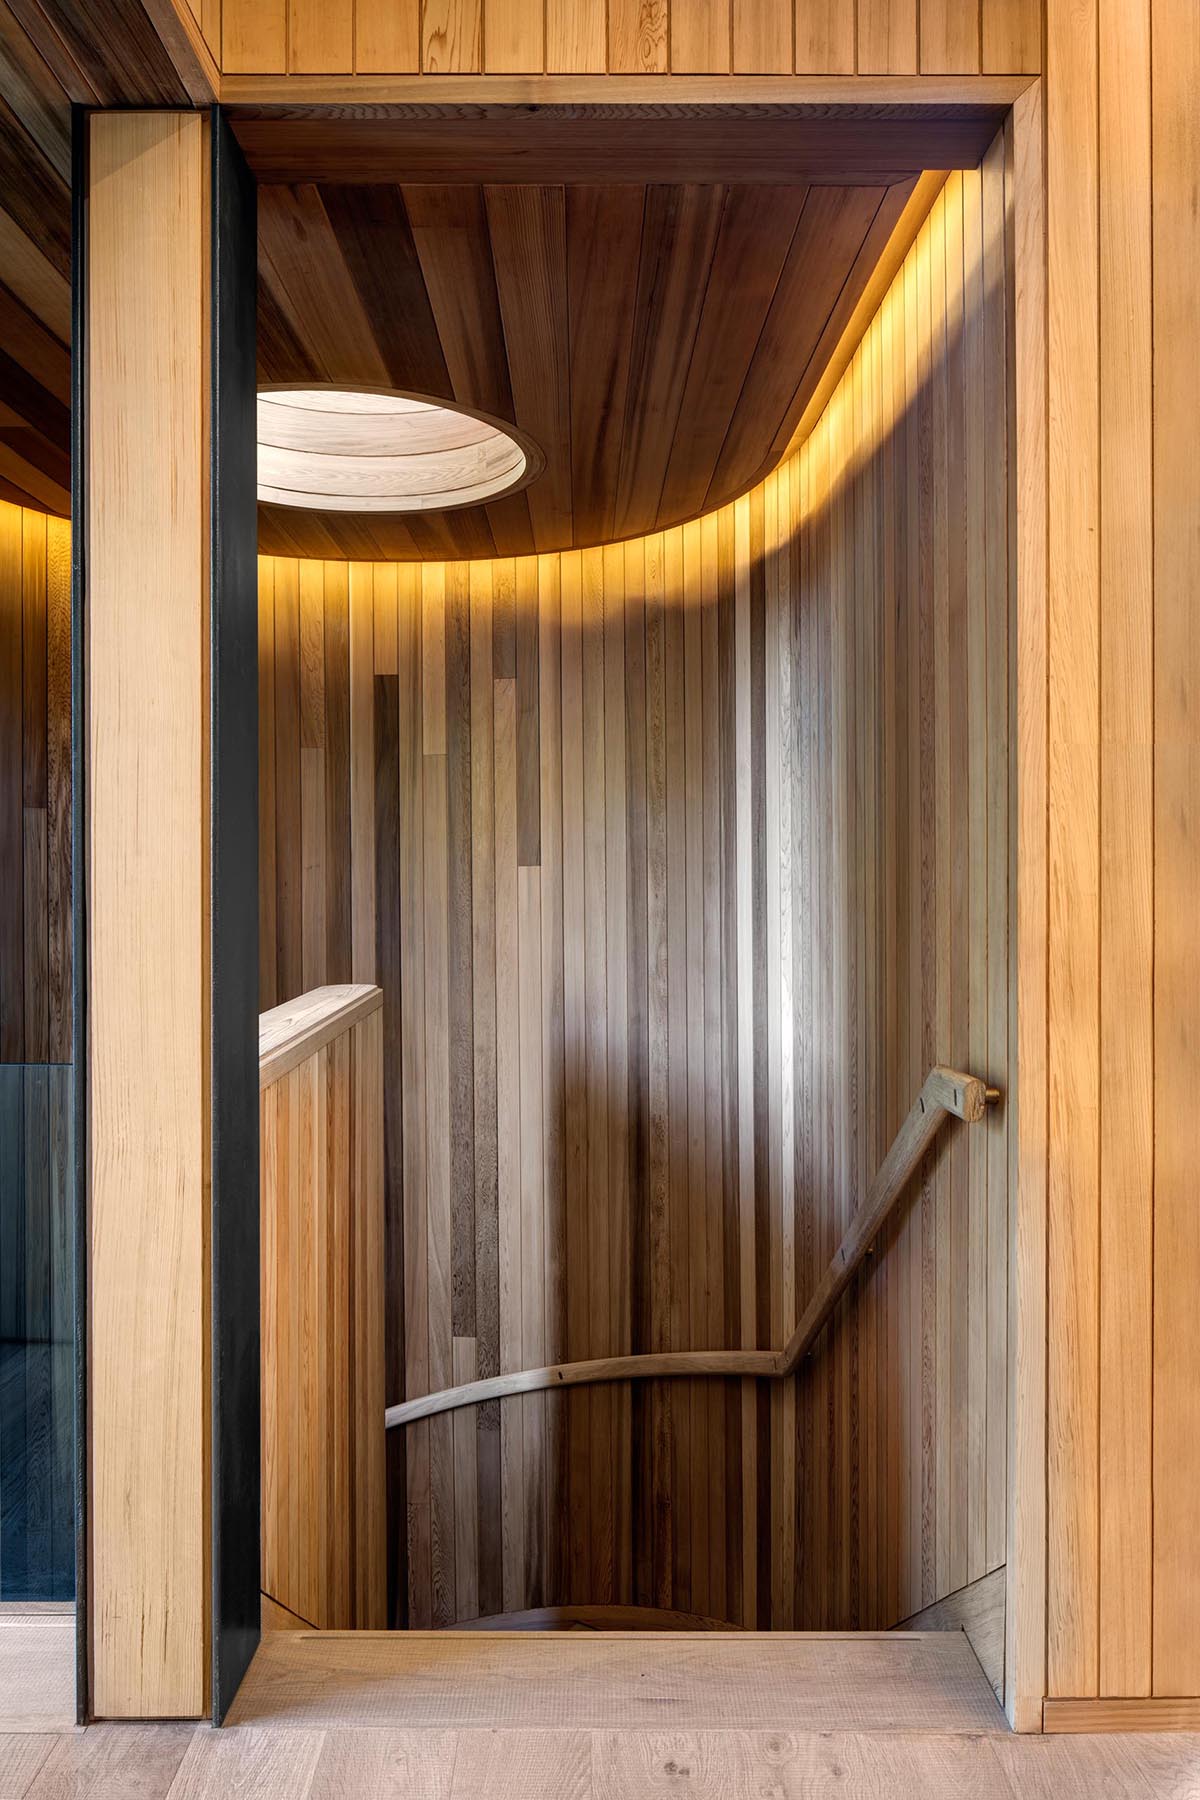 Modern wood lined stairs with a skylight and hidden lighting.